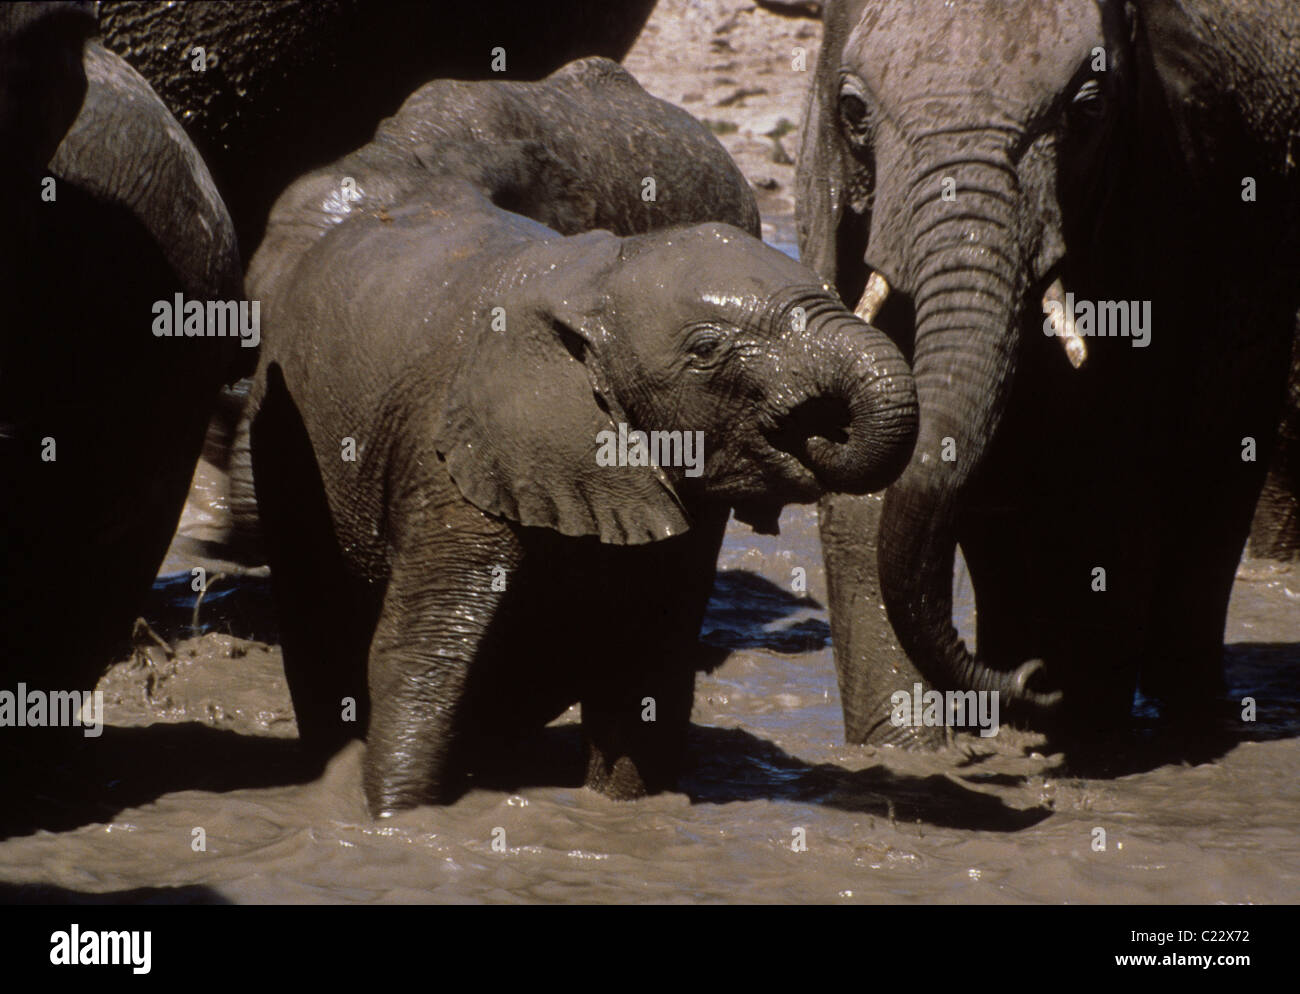 Elephant baby drinking and taking mud bath while being protected by the adults. African elephant (Loxodonta africana) in Etosha Stock Photo